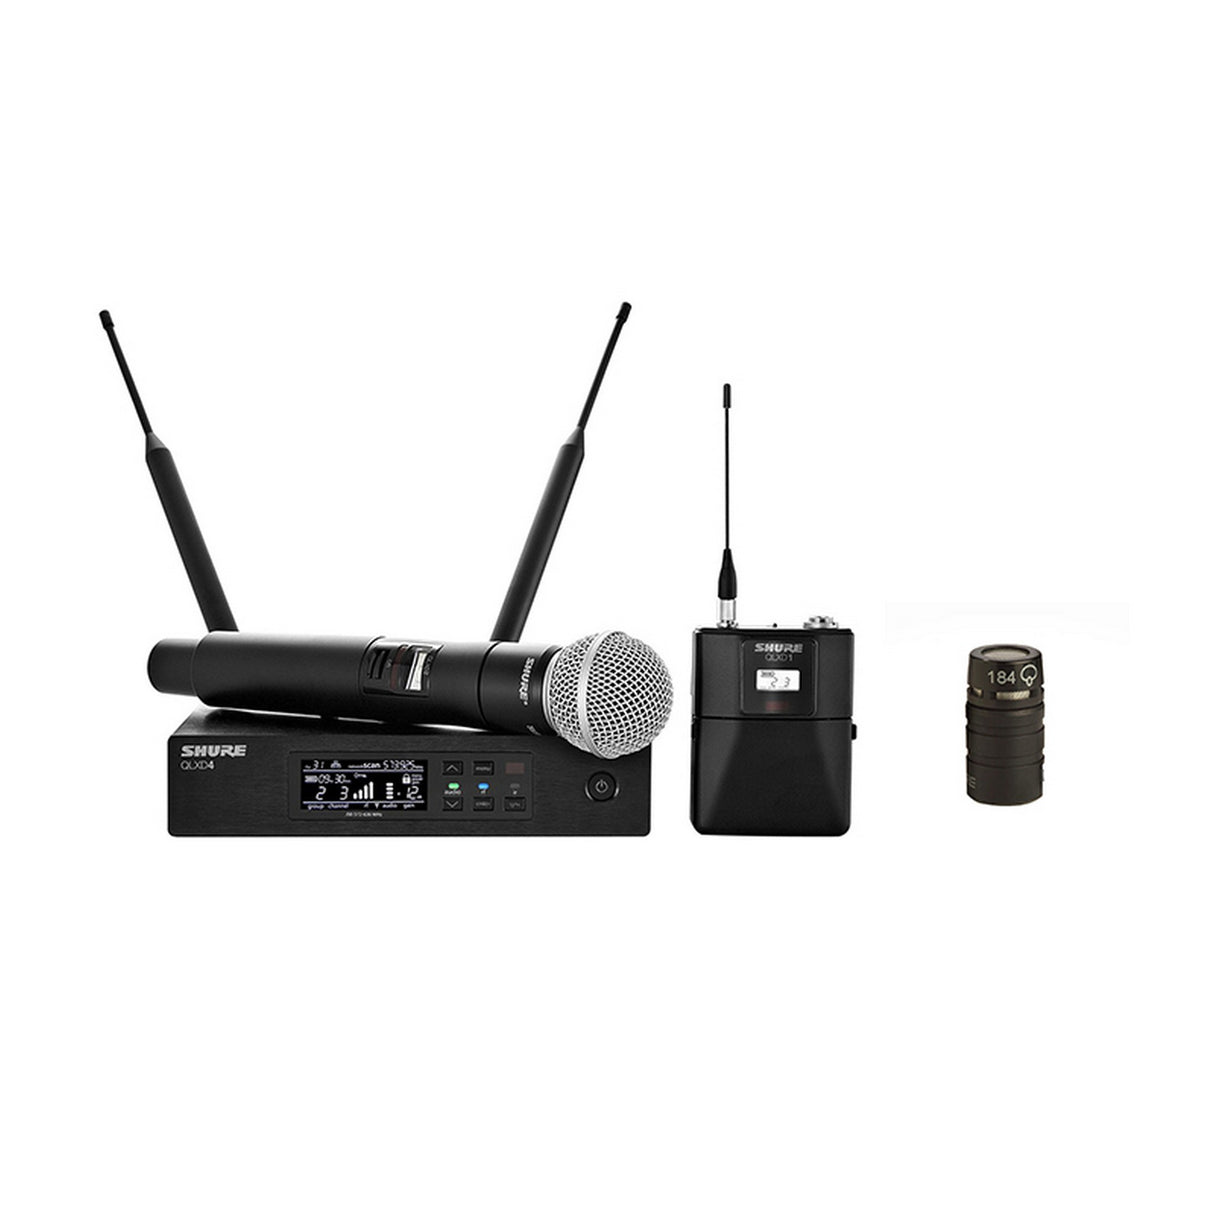 Shure QLXD124/84-J50A Wireless Bodypack and Handheld Vocal Combo System with WL184, J50A 572-608/614-616MHz